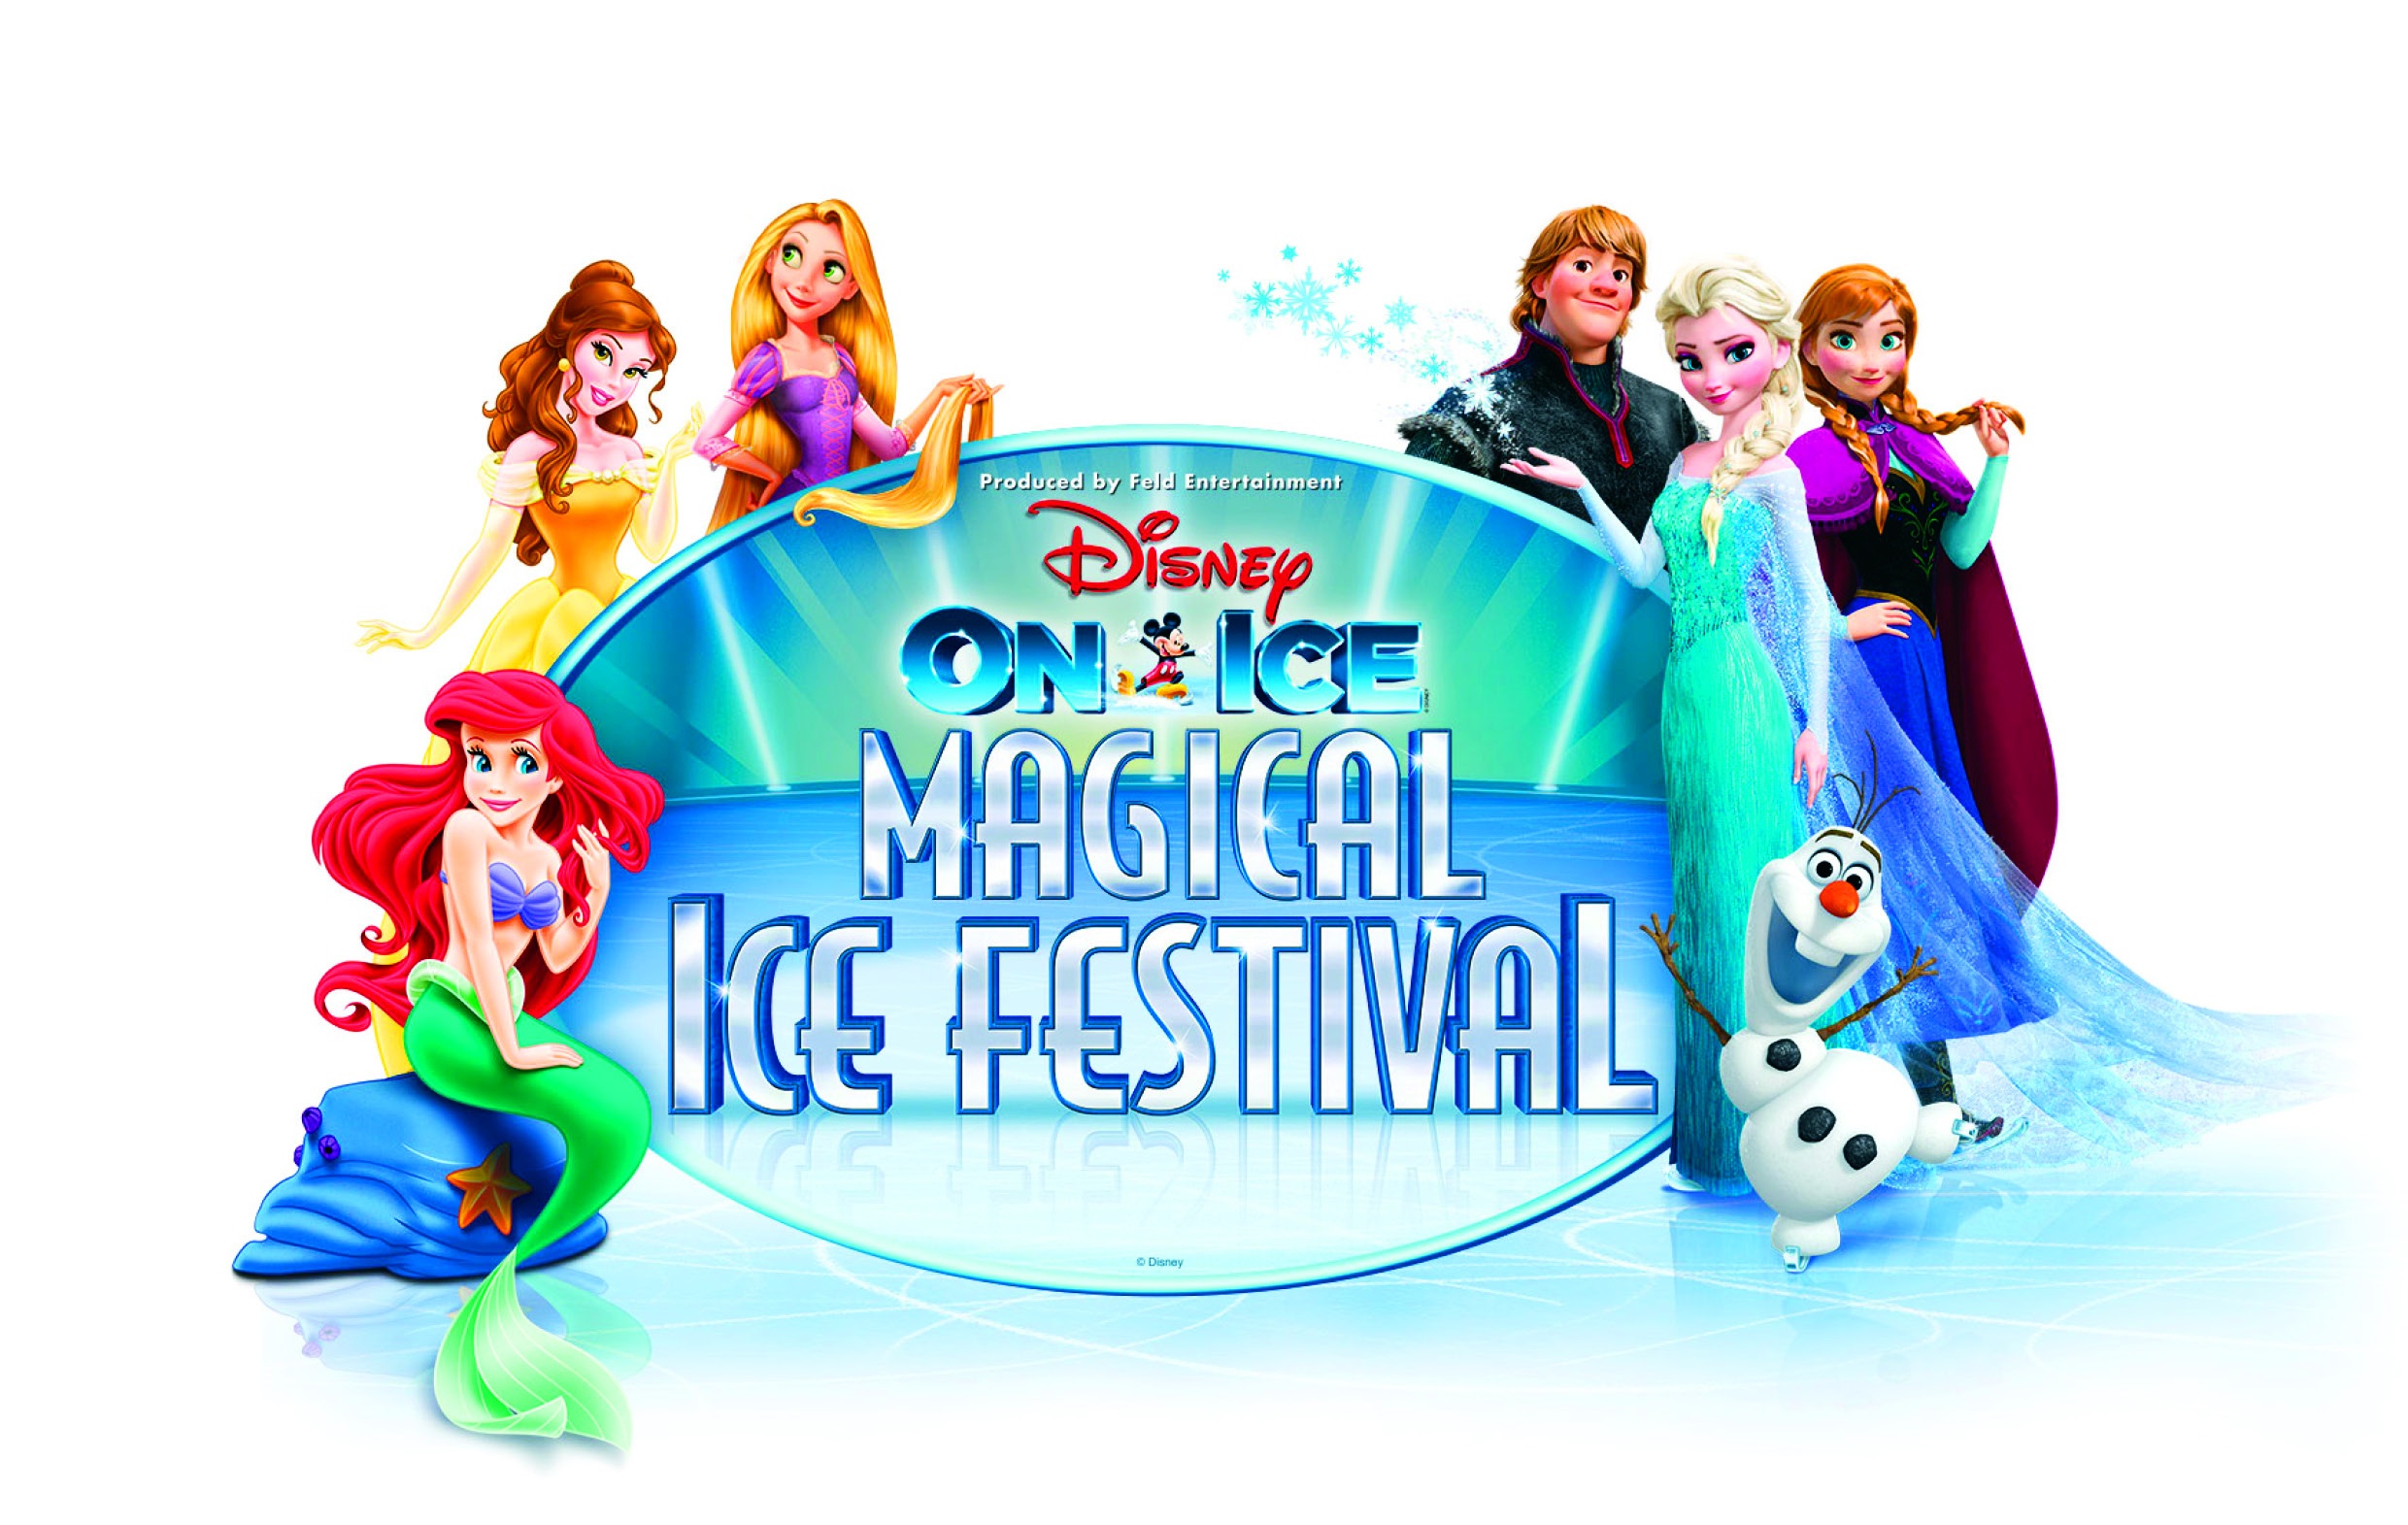 Awesome Free Printable Disney On Ice Activity Sheets Plus Your - Free Printable Disney Stories